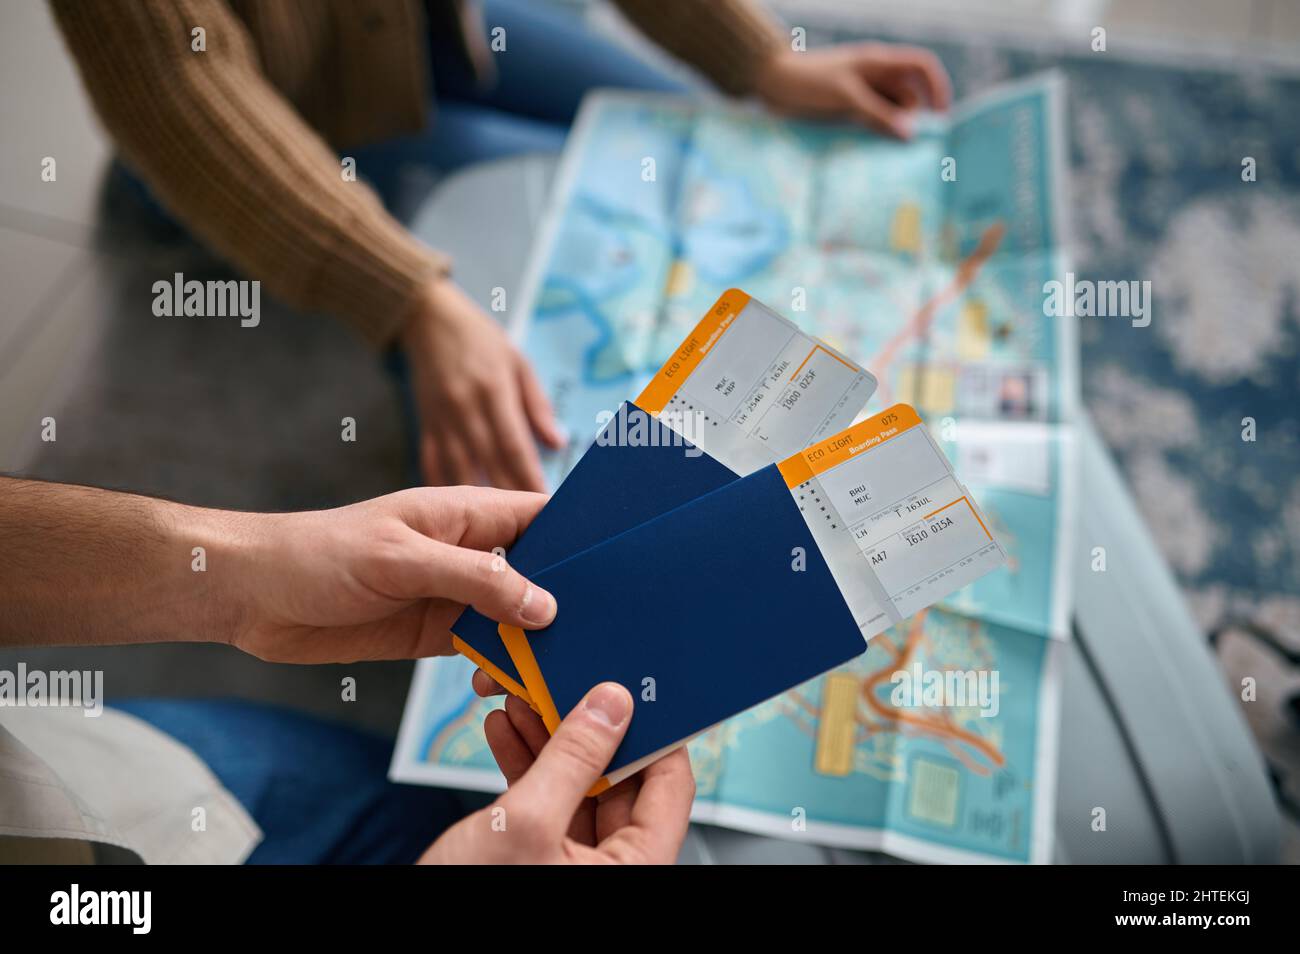 Closeup ticket in hand over guide map Stock Photo